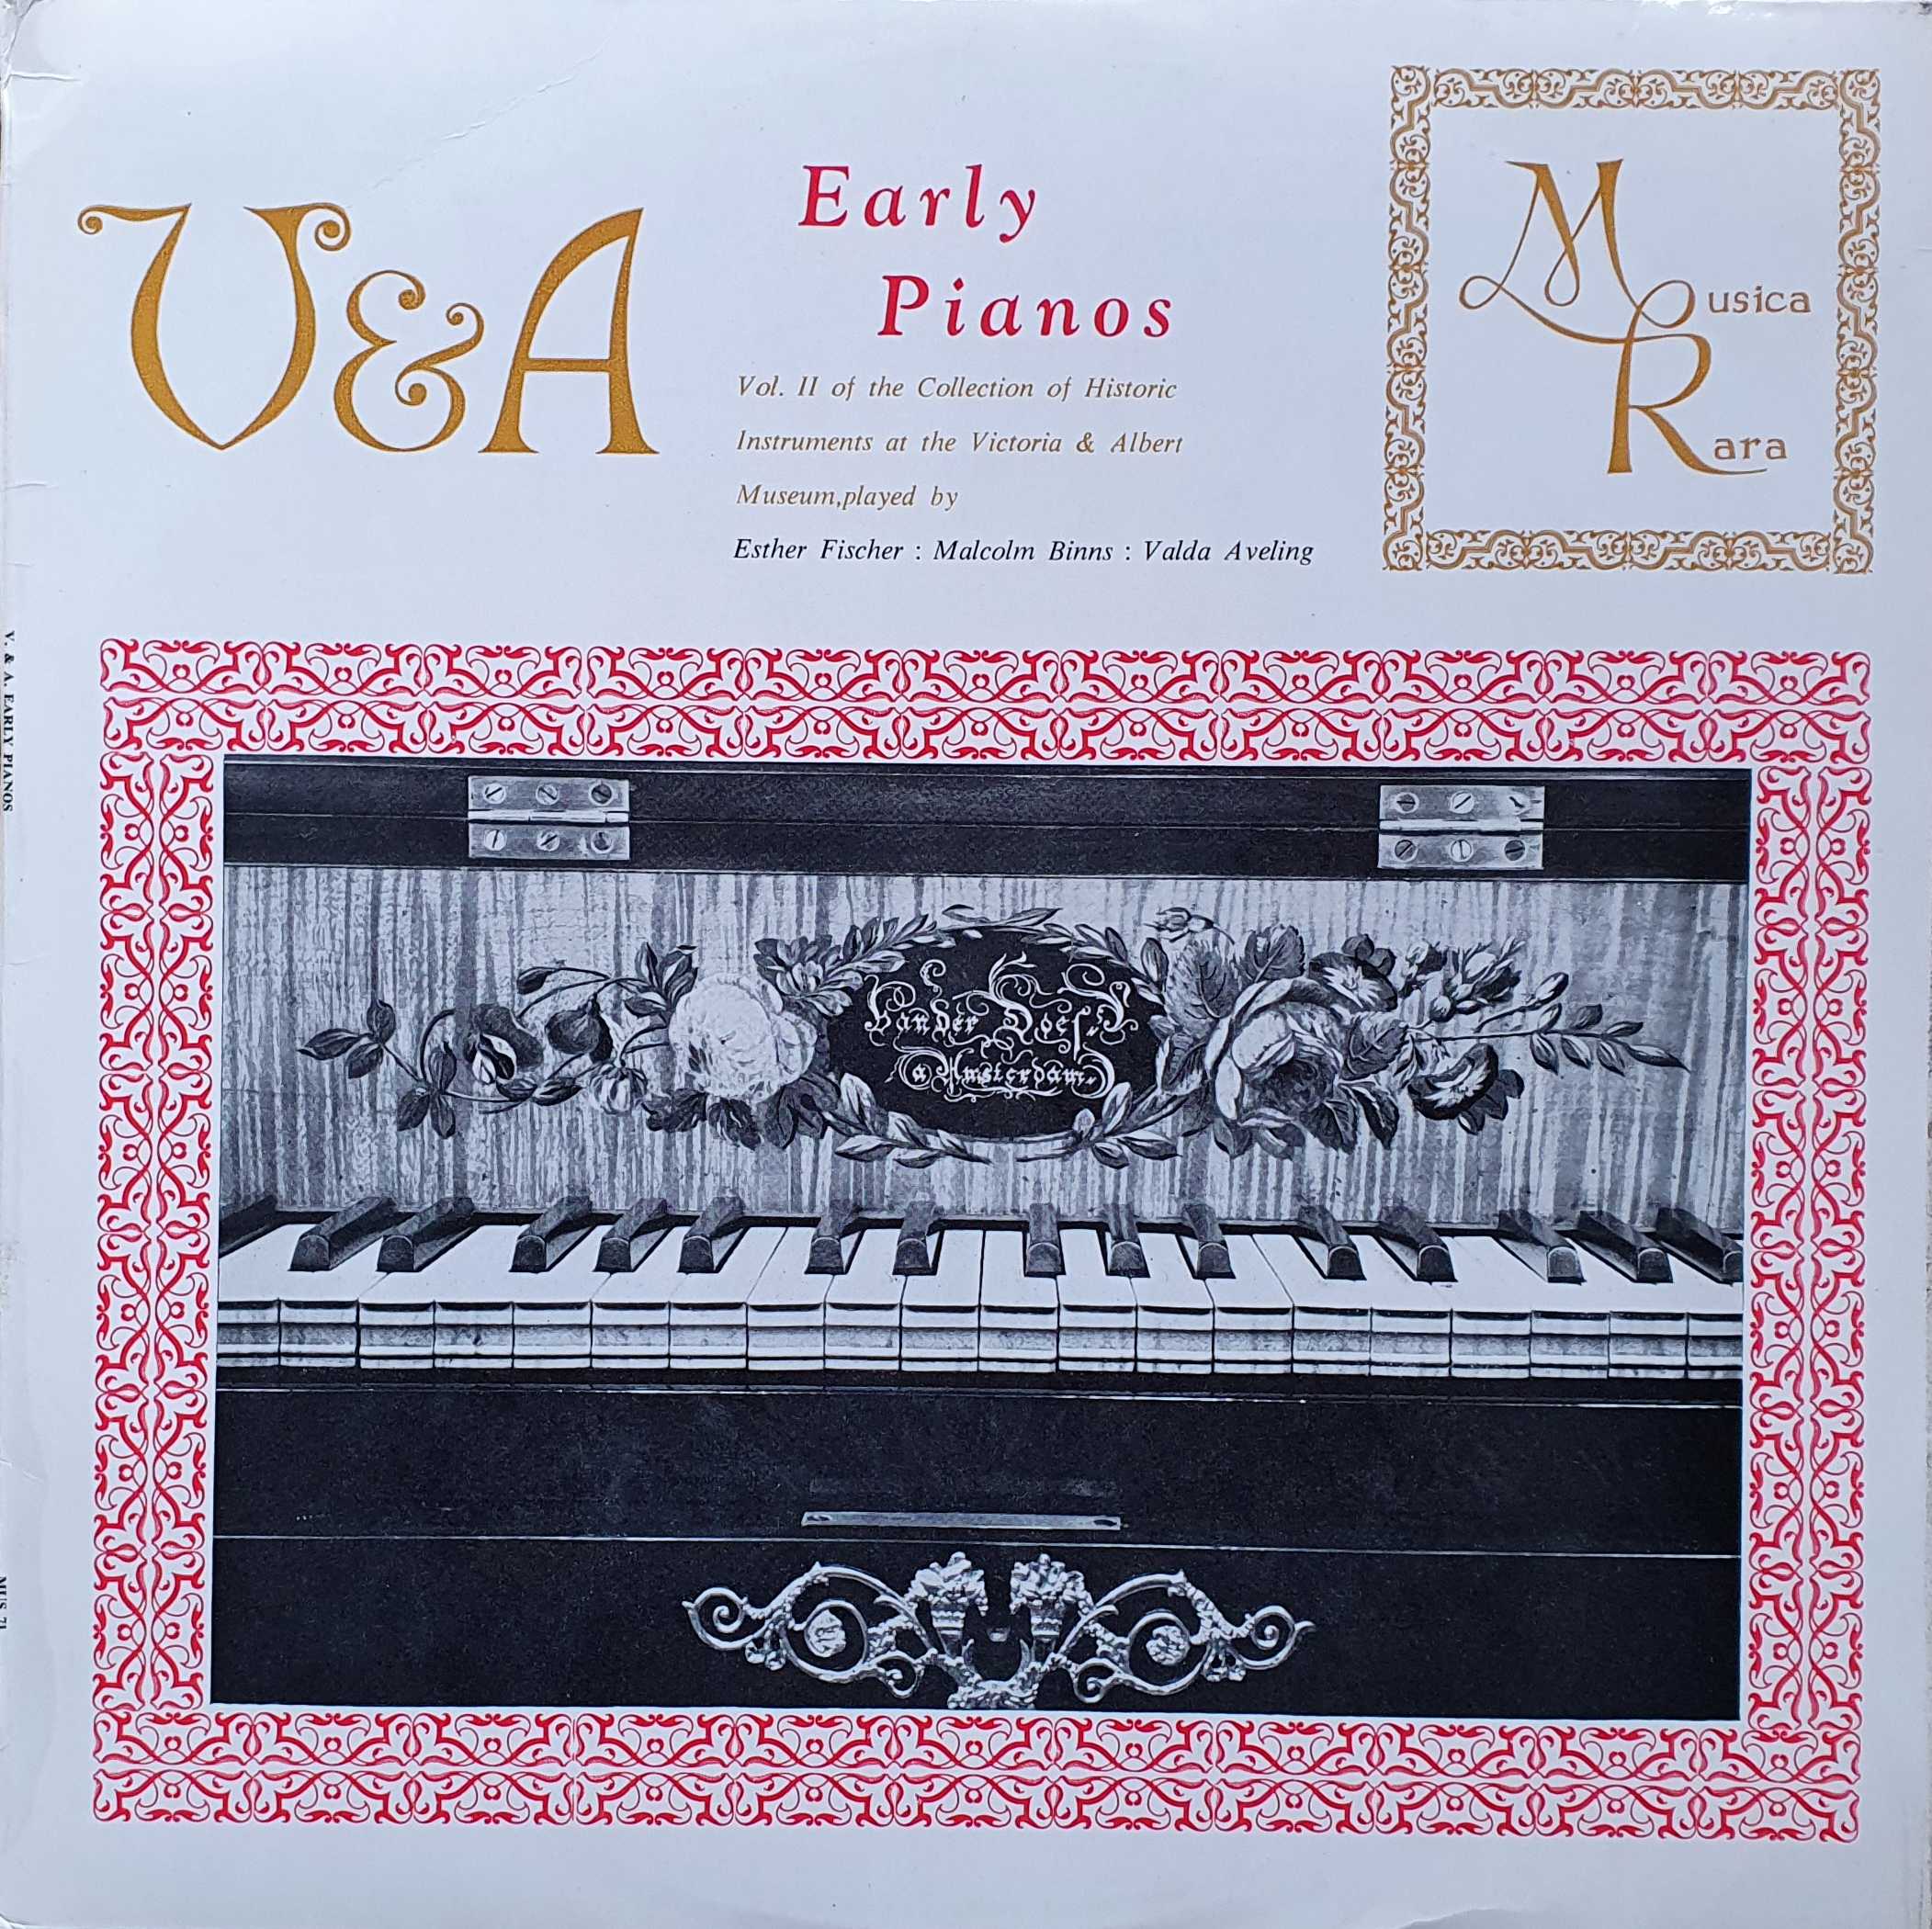 Picture of MUS 71 The V & A keyboard collection - Volume II by artist Various from the BBC albums - Records and Tapes library